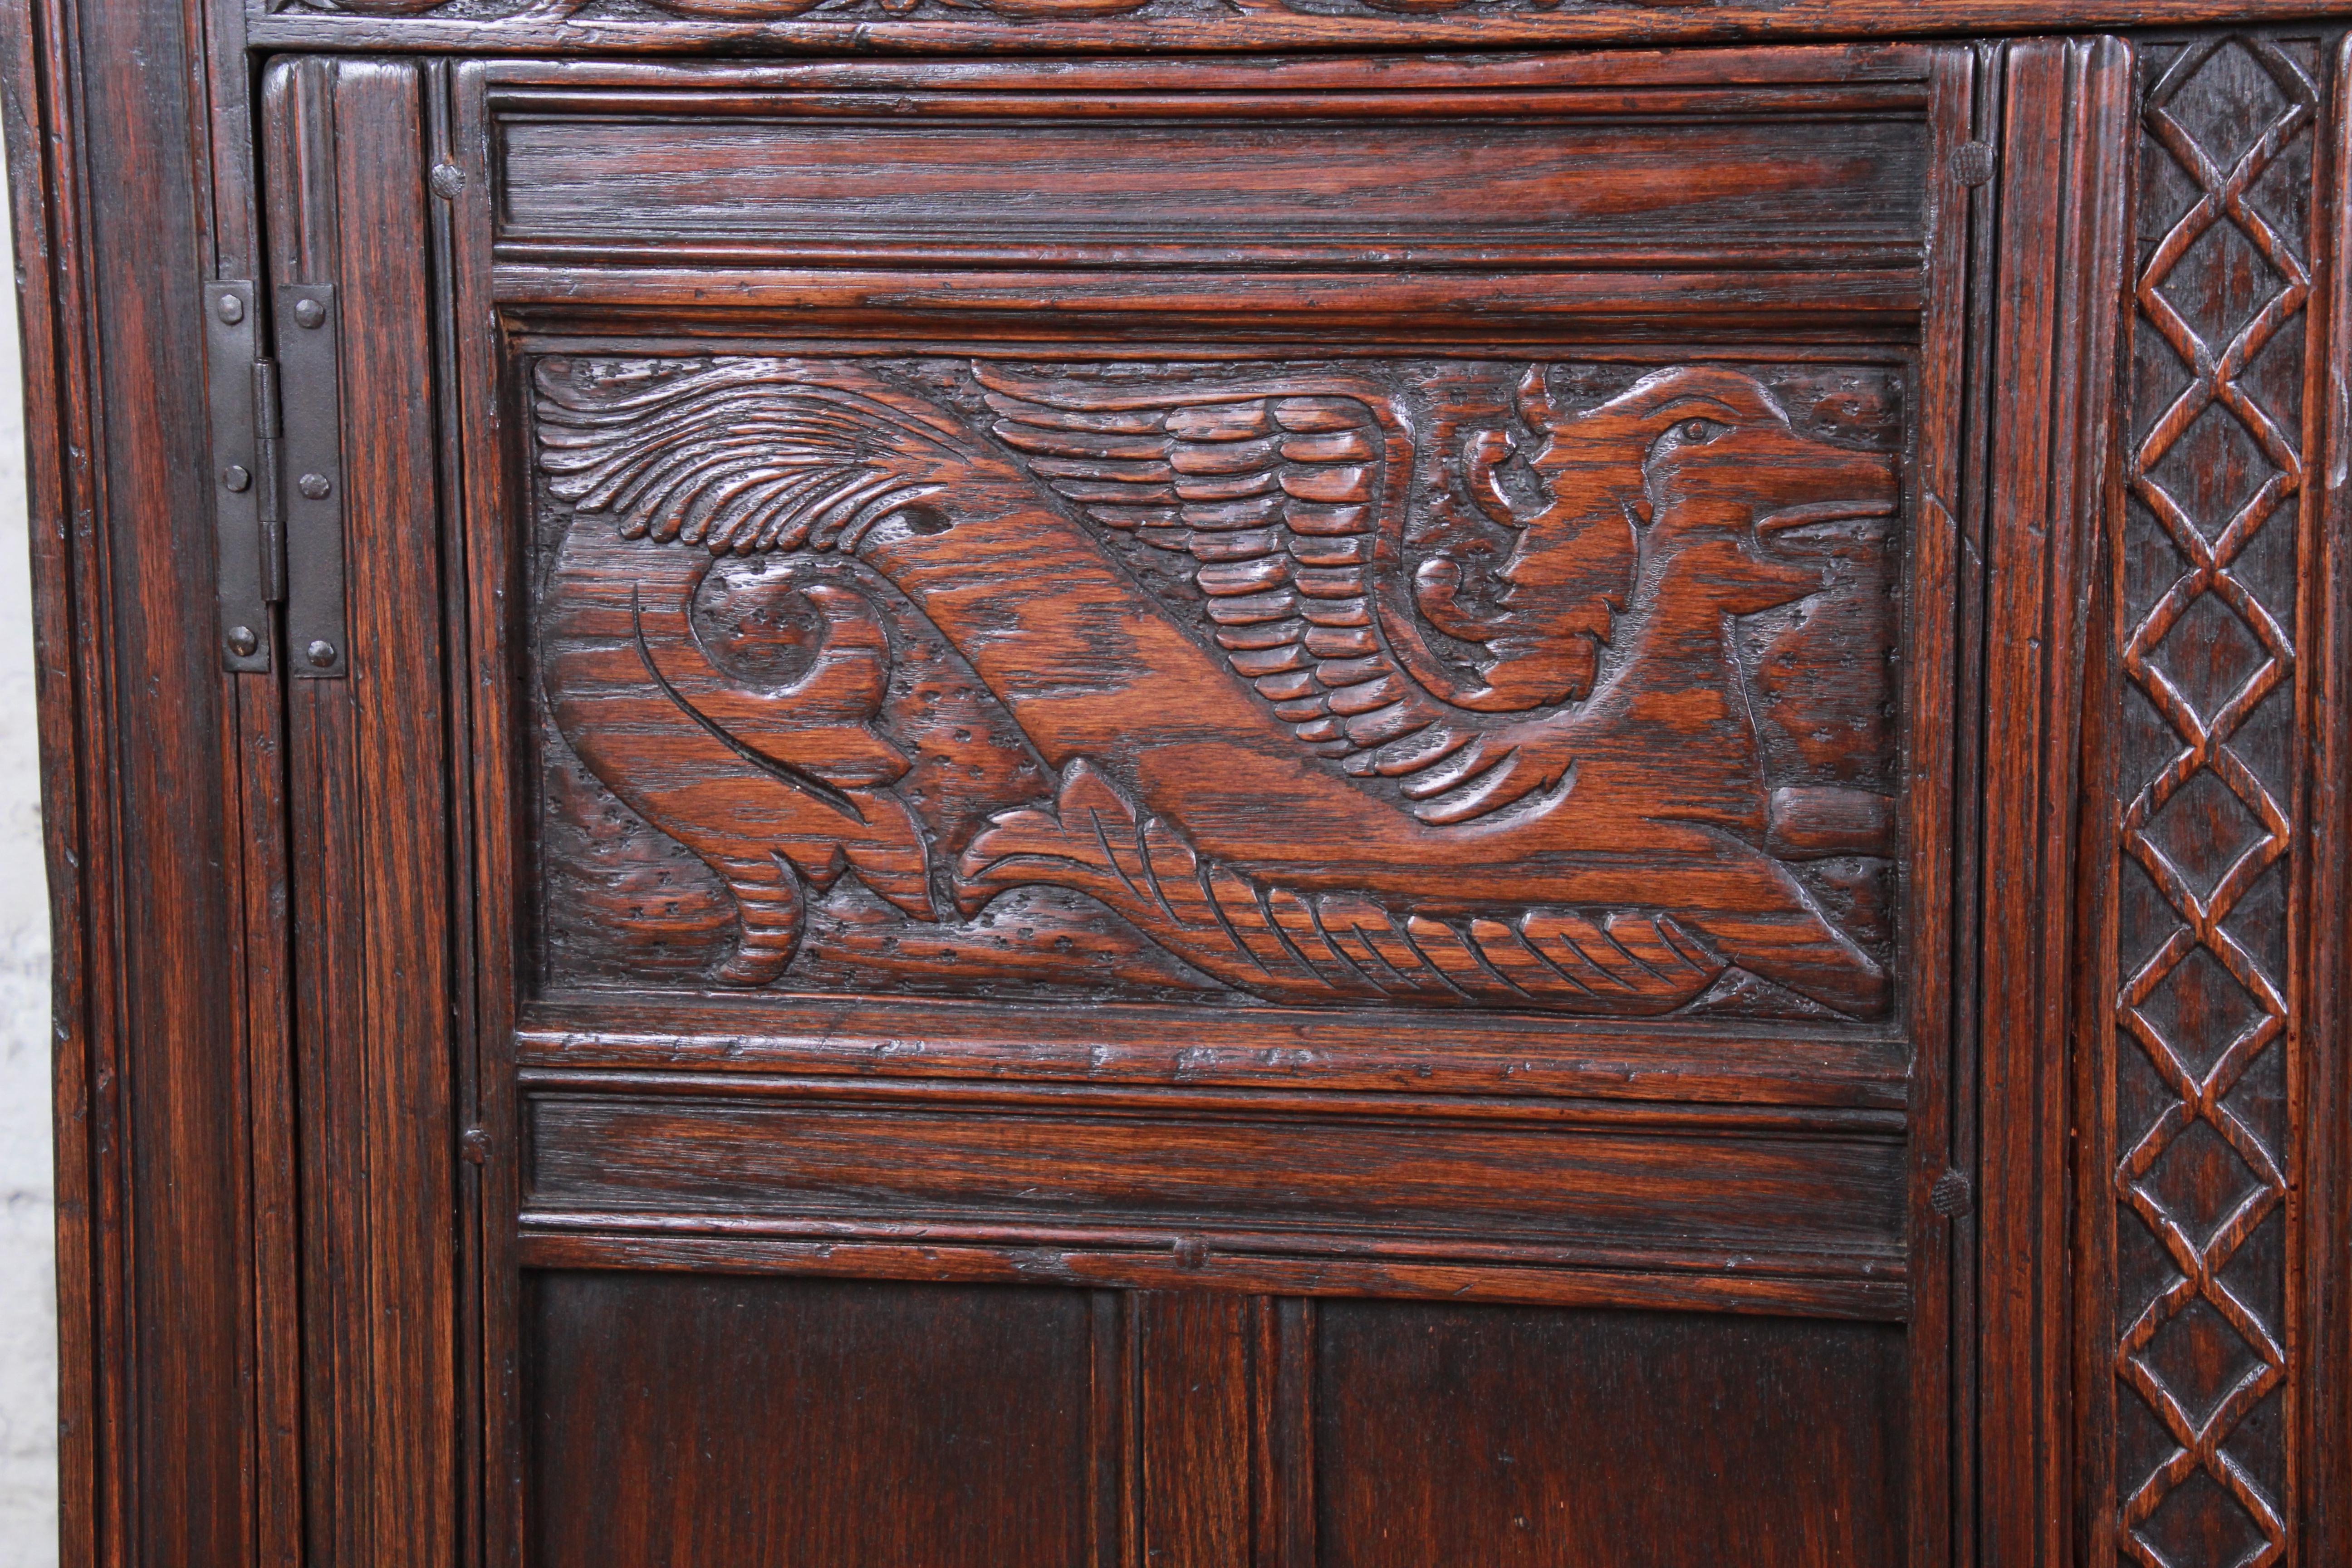 Early 20th Century Antique Carved Oak Bar Cabinet by Kensington of New York, circa 1920s